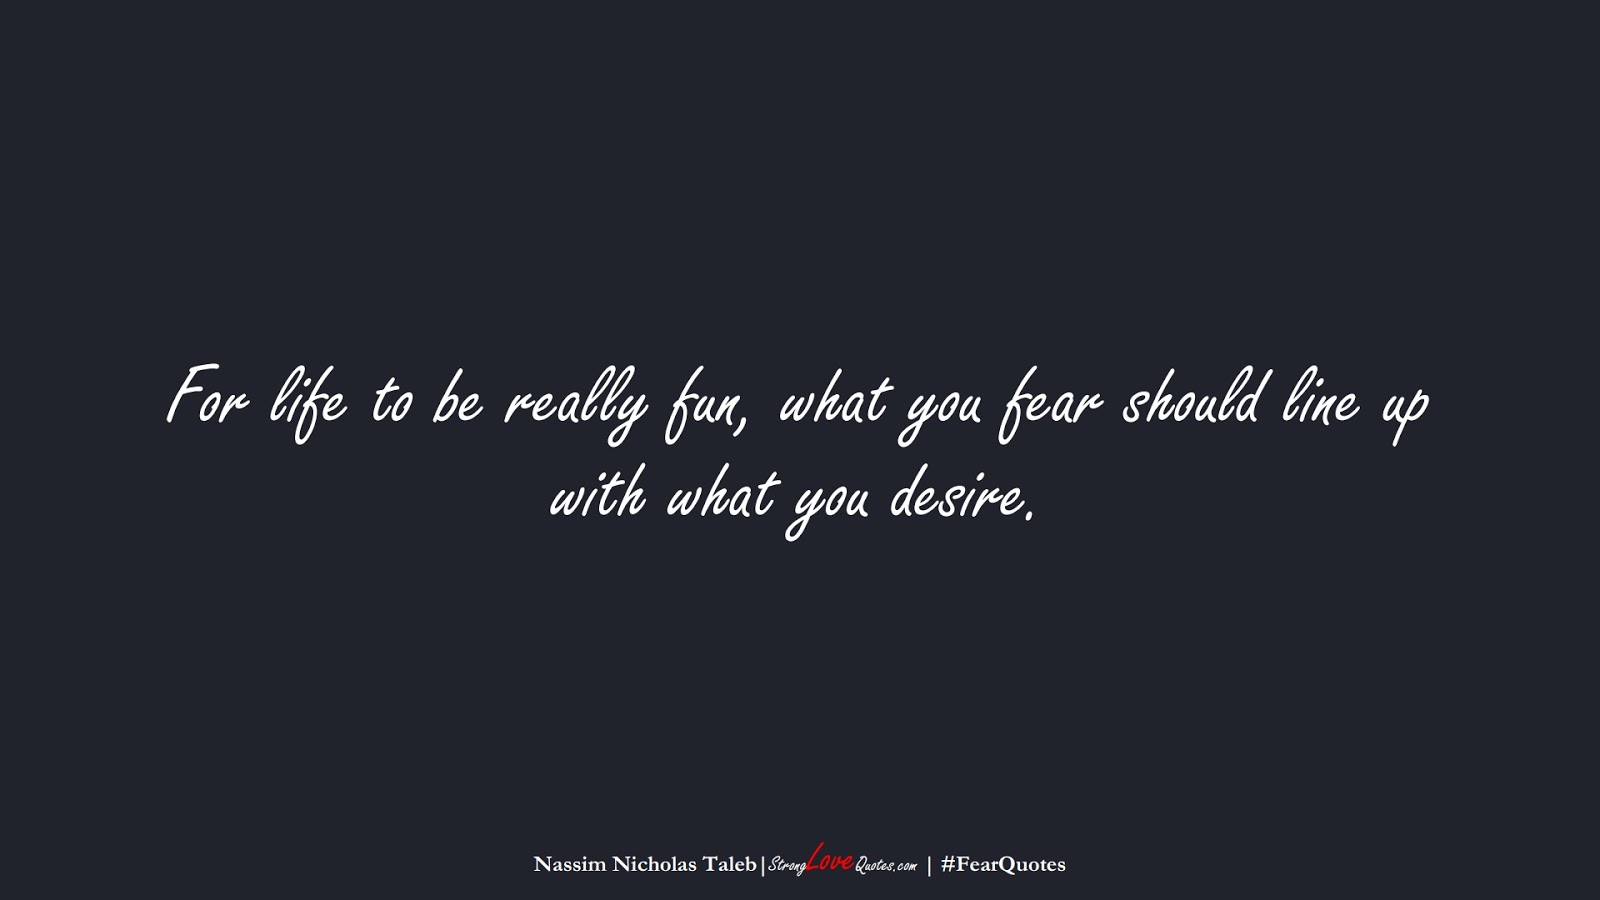 For life to be really fun, what you fear should line up with what you desire. (Nassim Nicholas Taleb);  #FearQuotes